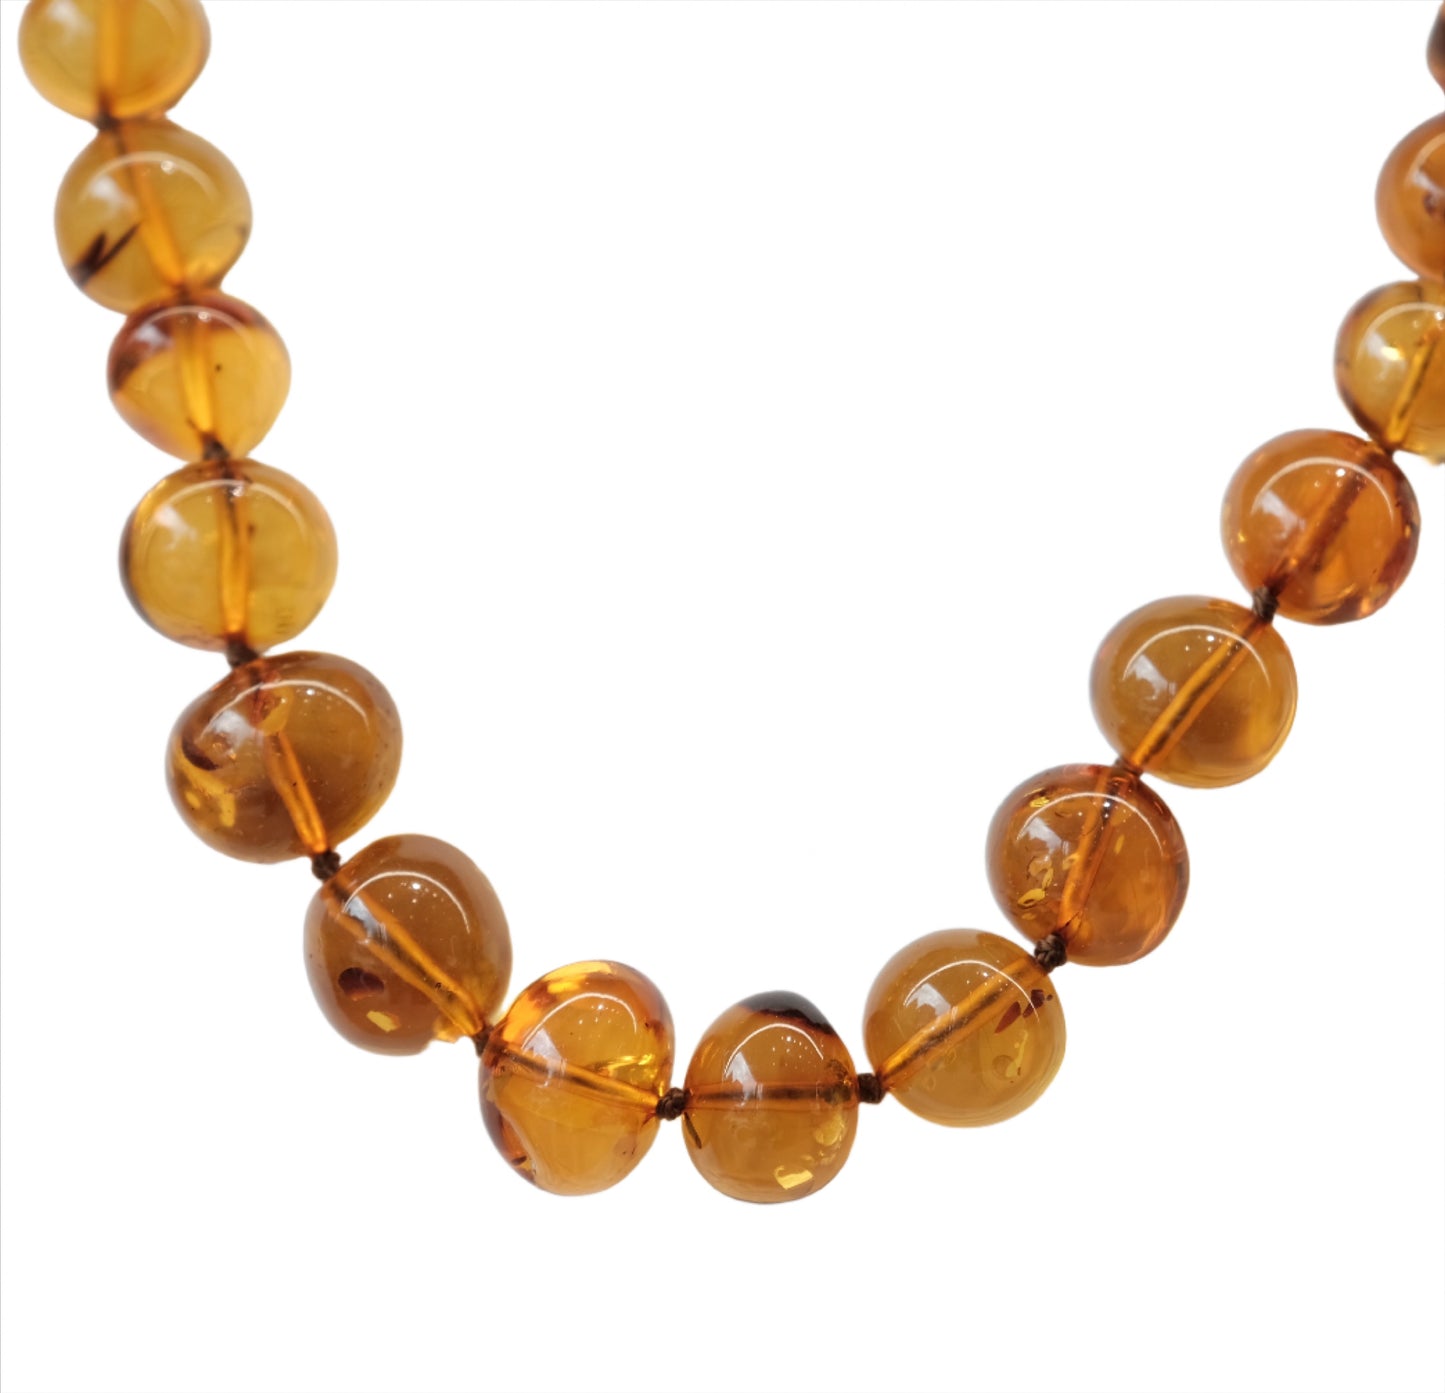 Amber Cognac Beads Necklace Adult Size